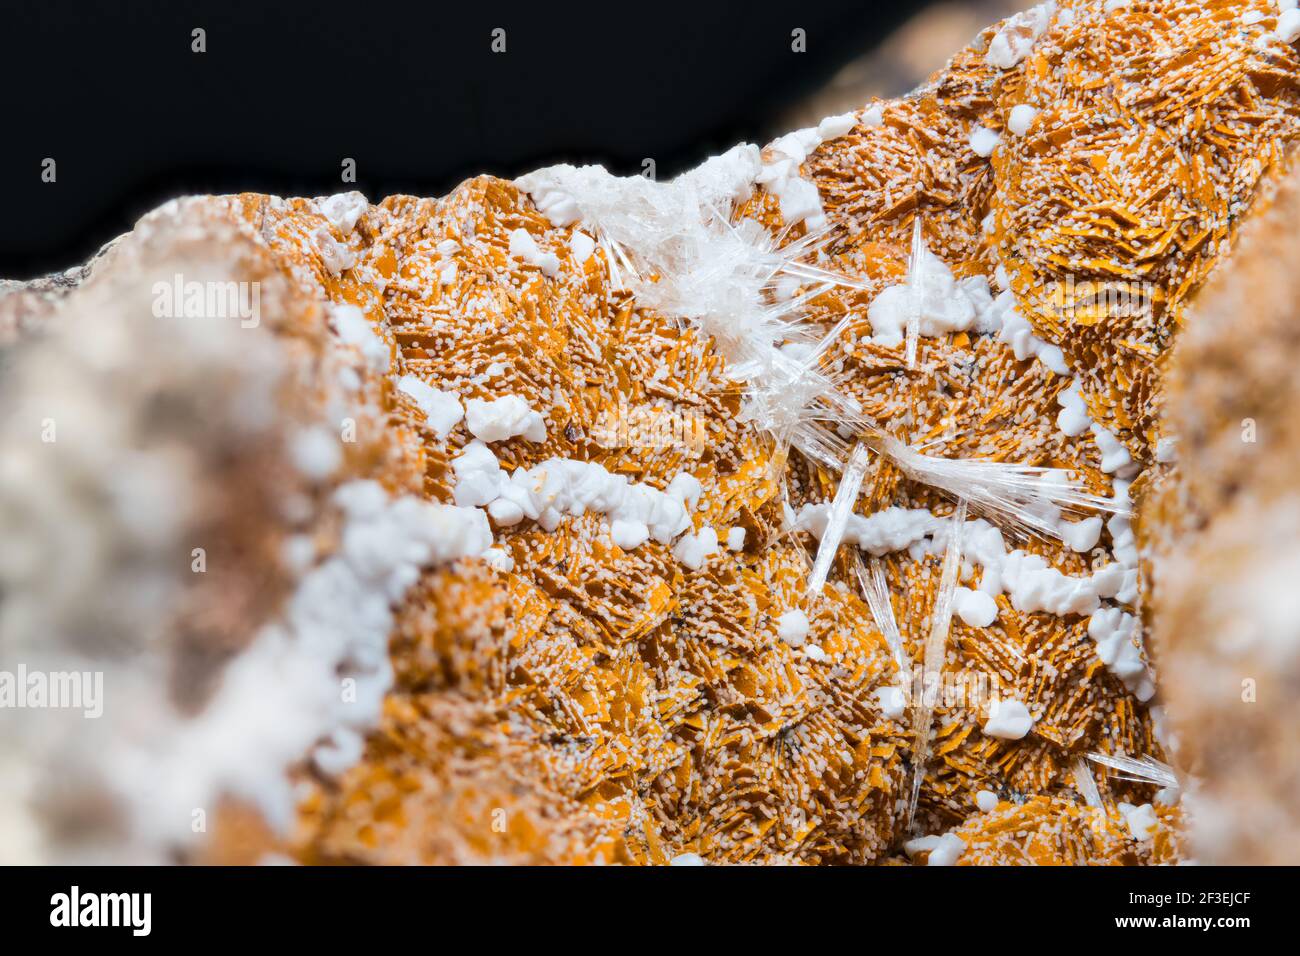 Detail of orange and white aragonite with clusters of crystals on black background. Close-up of beautiful texture of mineral from calcium carbonate. Stock Photo